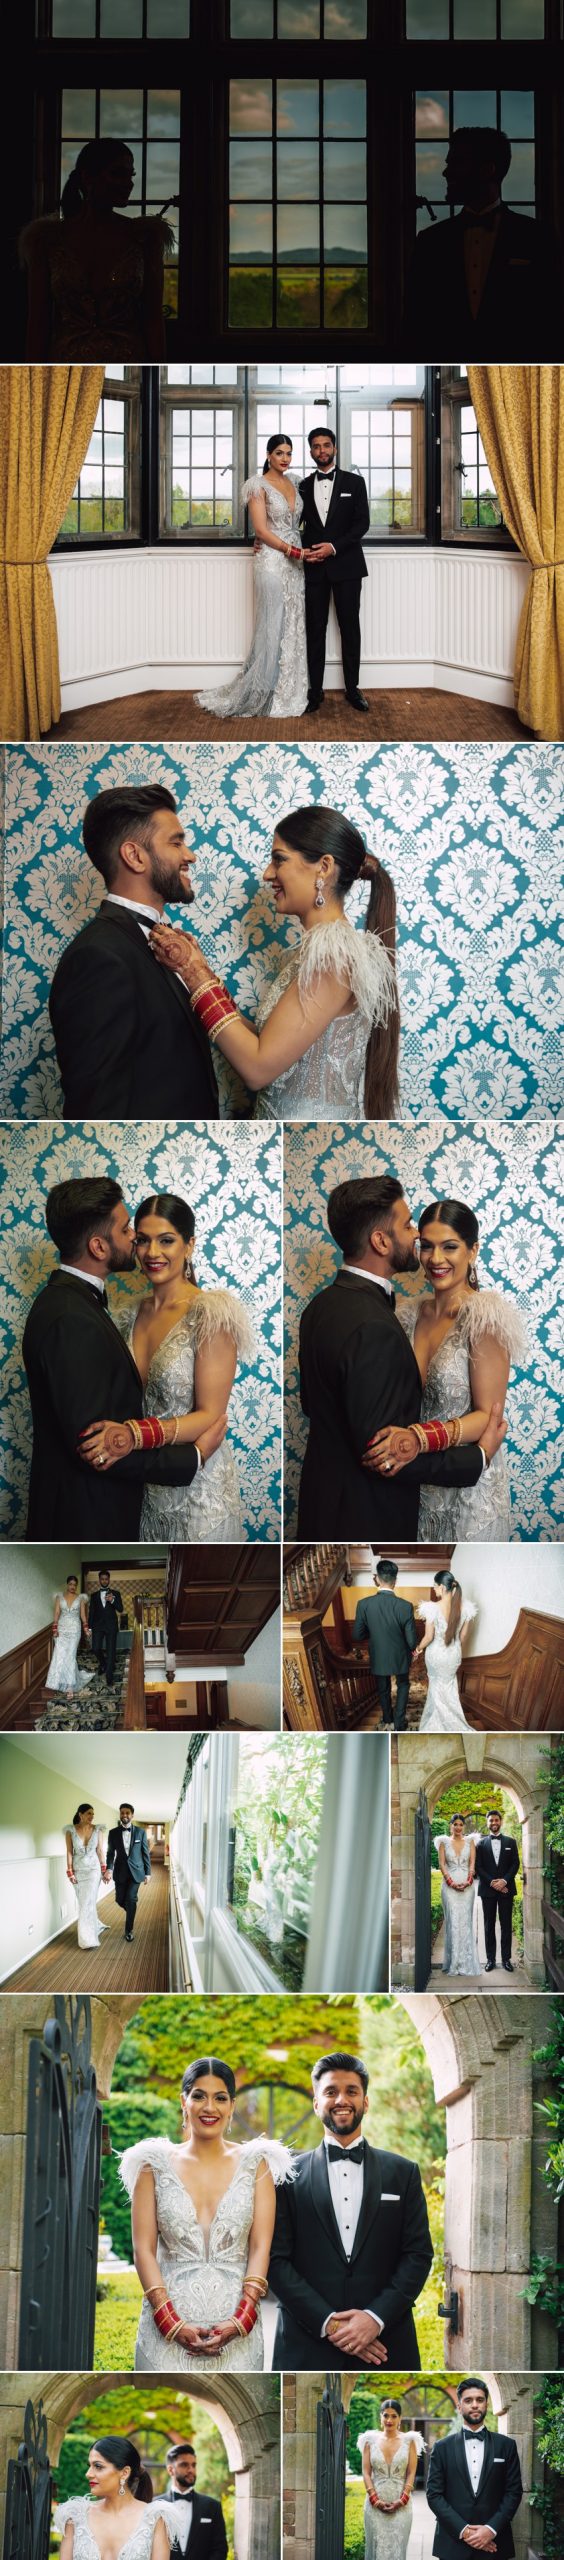 Sikh Wedding Photography at Dunchurch Park Hotel 16 scaled